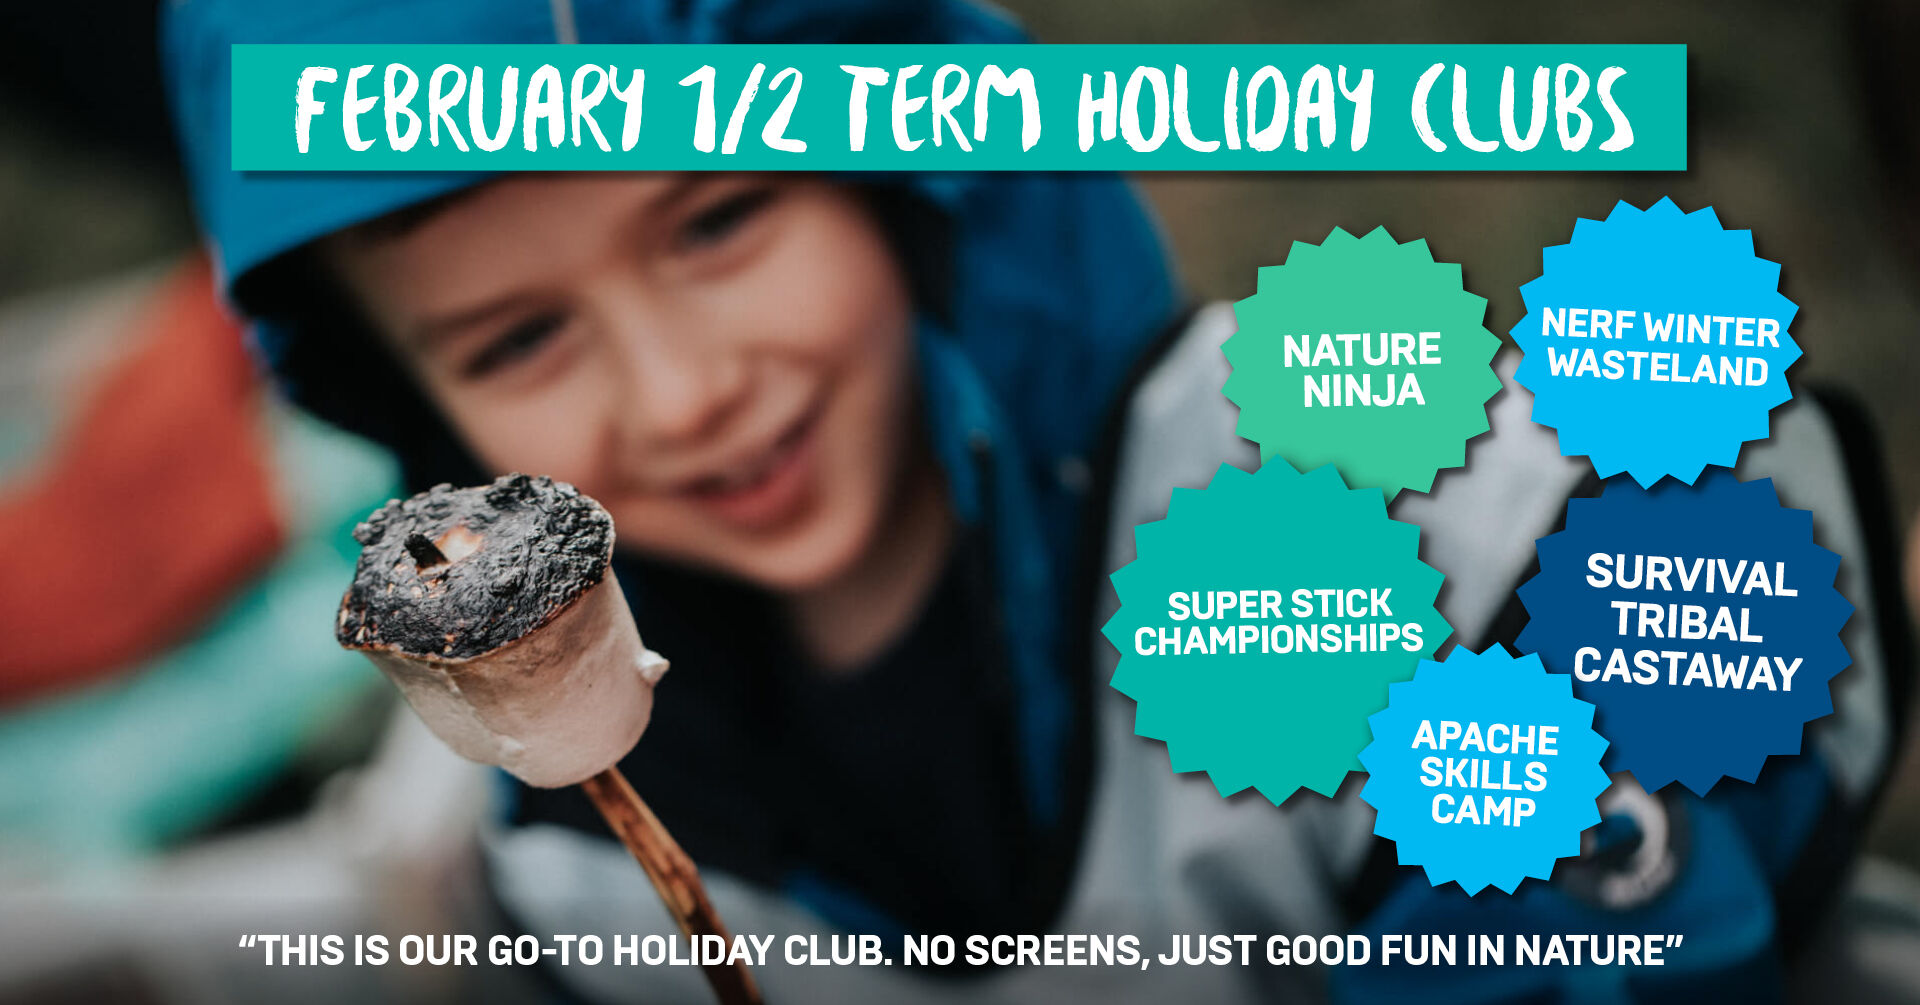 Lincoln February Half Term Holiday Clubs 